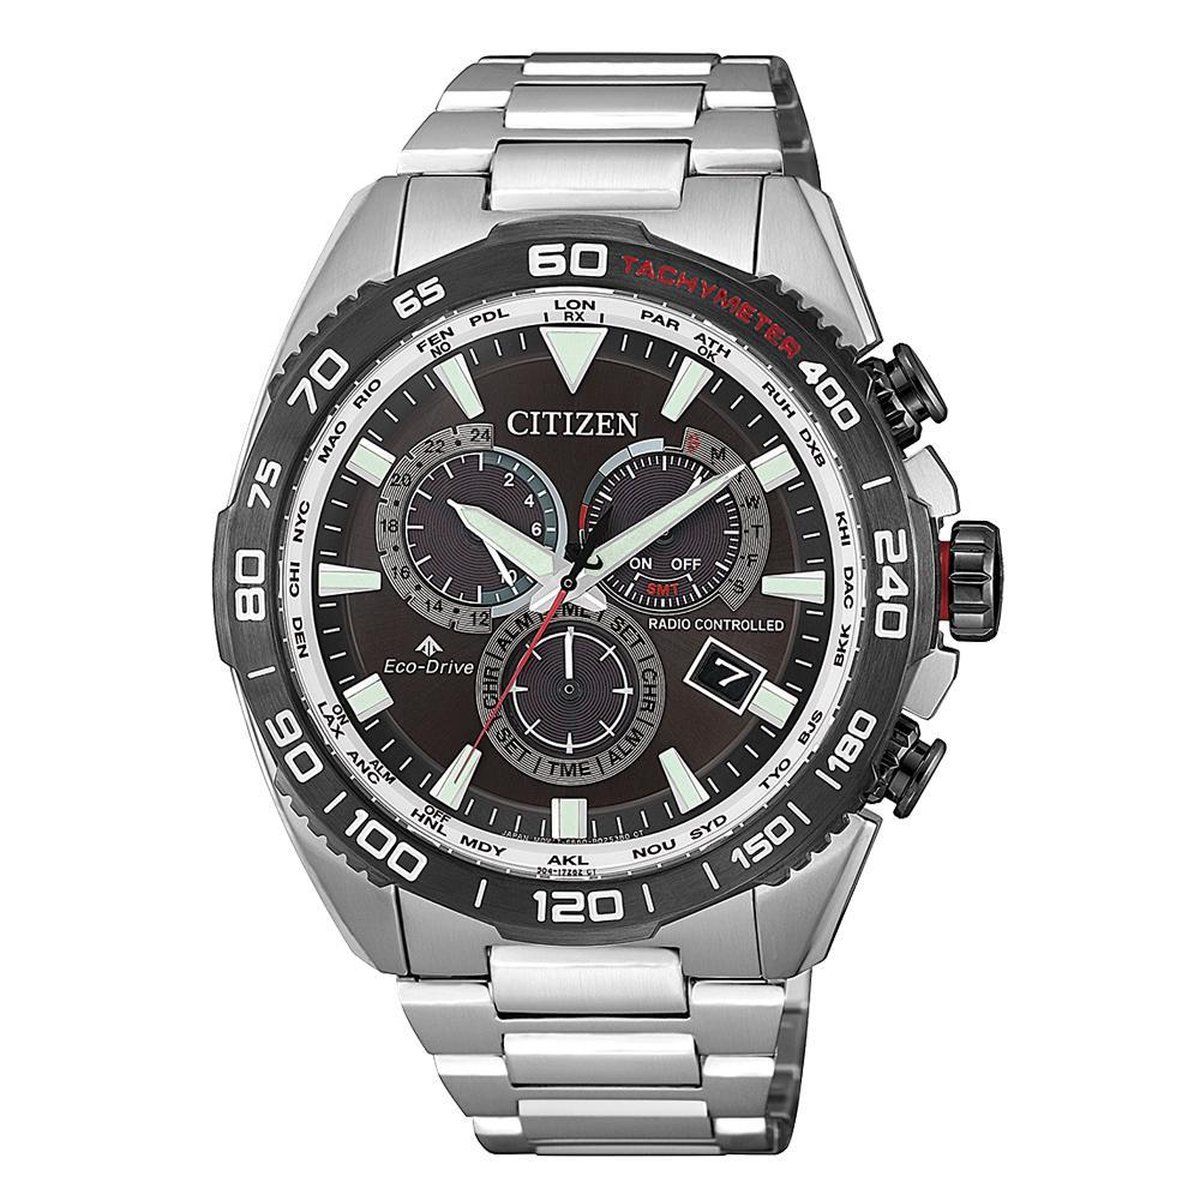 This Citizen Promaster Marine Multi Dial Watch for Men is the perfect timepiece to wear or to gift. It's Silver 44 mm Round case combined with the comfortable Silver Stainless steel will ensure you enjoy this stunning timepiece without any compromise. Operated by a high quality Eco-Drive movement and water resistant to 20 bars, your watch will keep ticking. This Sporty watch has an Eco-drive technology (Recharged by any light source; never needs a battery) - The watch has a Calendar function: Day-Date, Solar Powered, Radio Controlled,24-hour Display, Alarm, Luminous Hands High quality 21 cm length and 24 mm width Silver Stainless steel strap with a Fold over clasp with safety Case diameter: 44 mm,case thickness: 13 mm, case colour: Silver and dial colour: Black